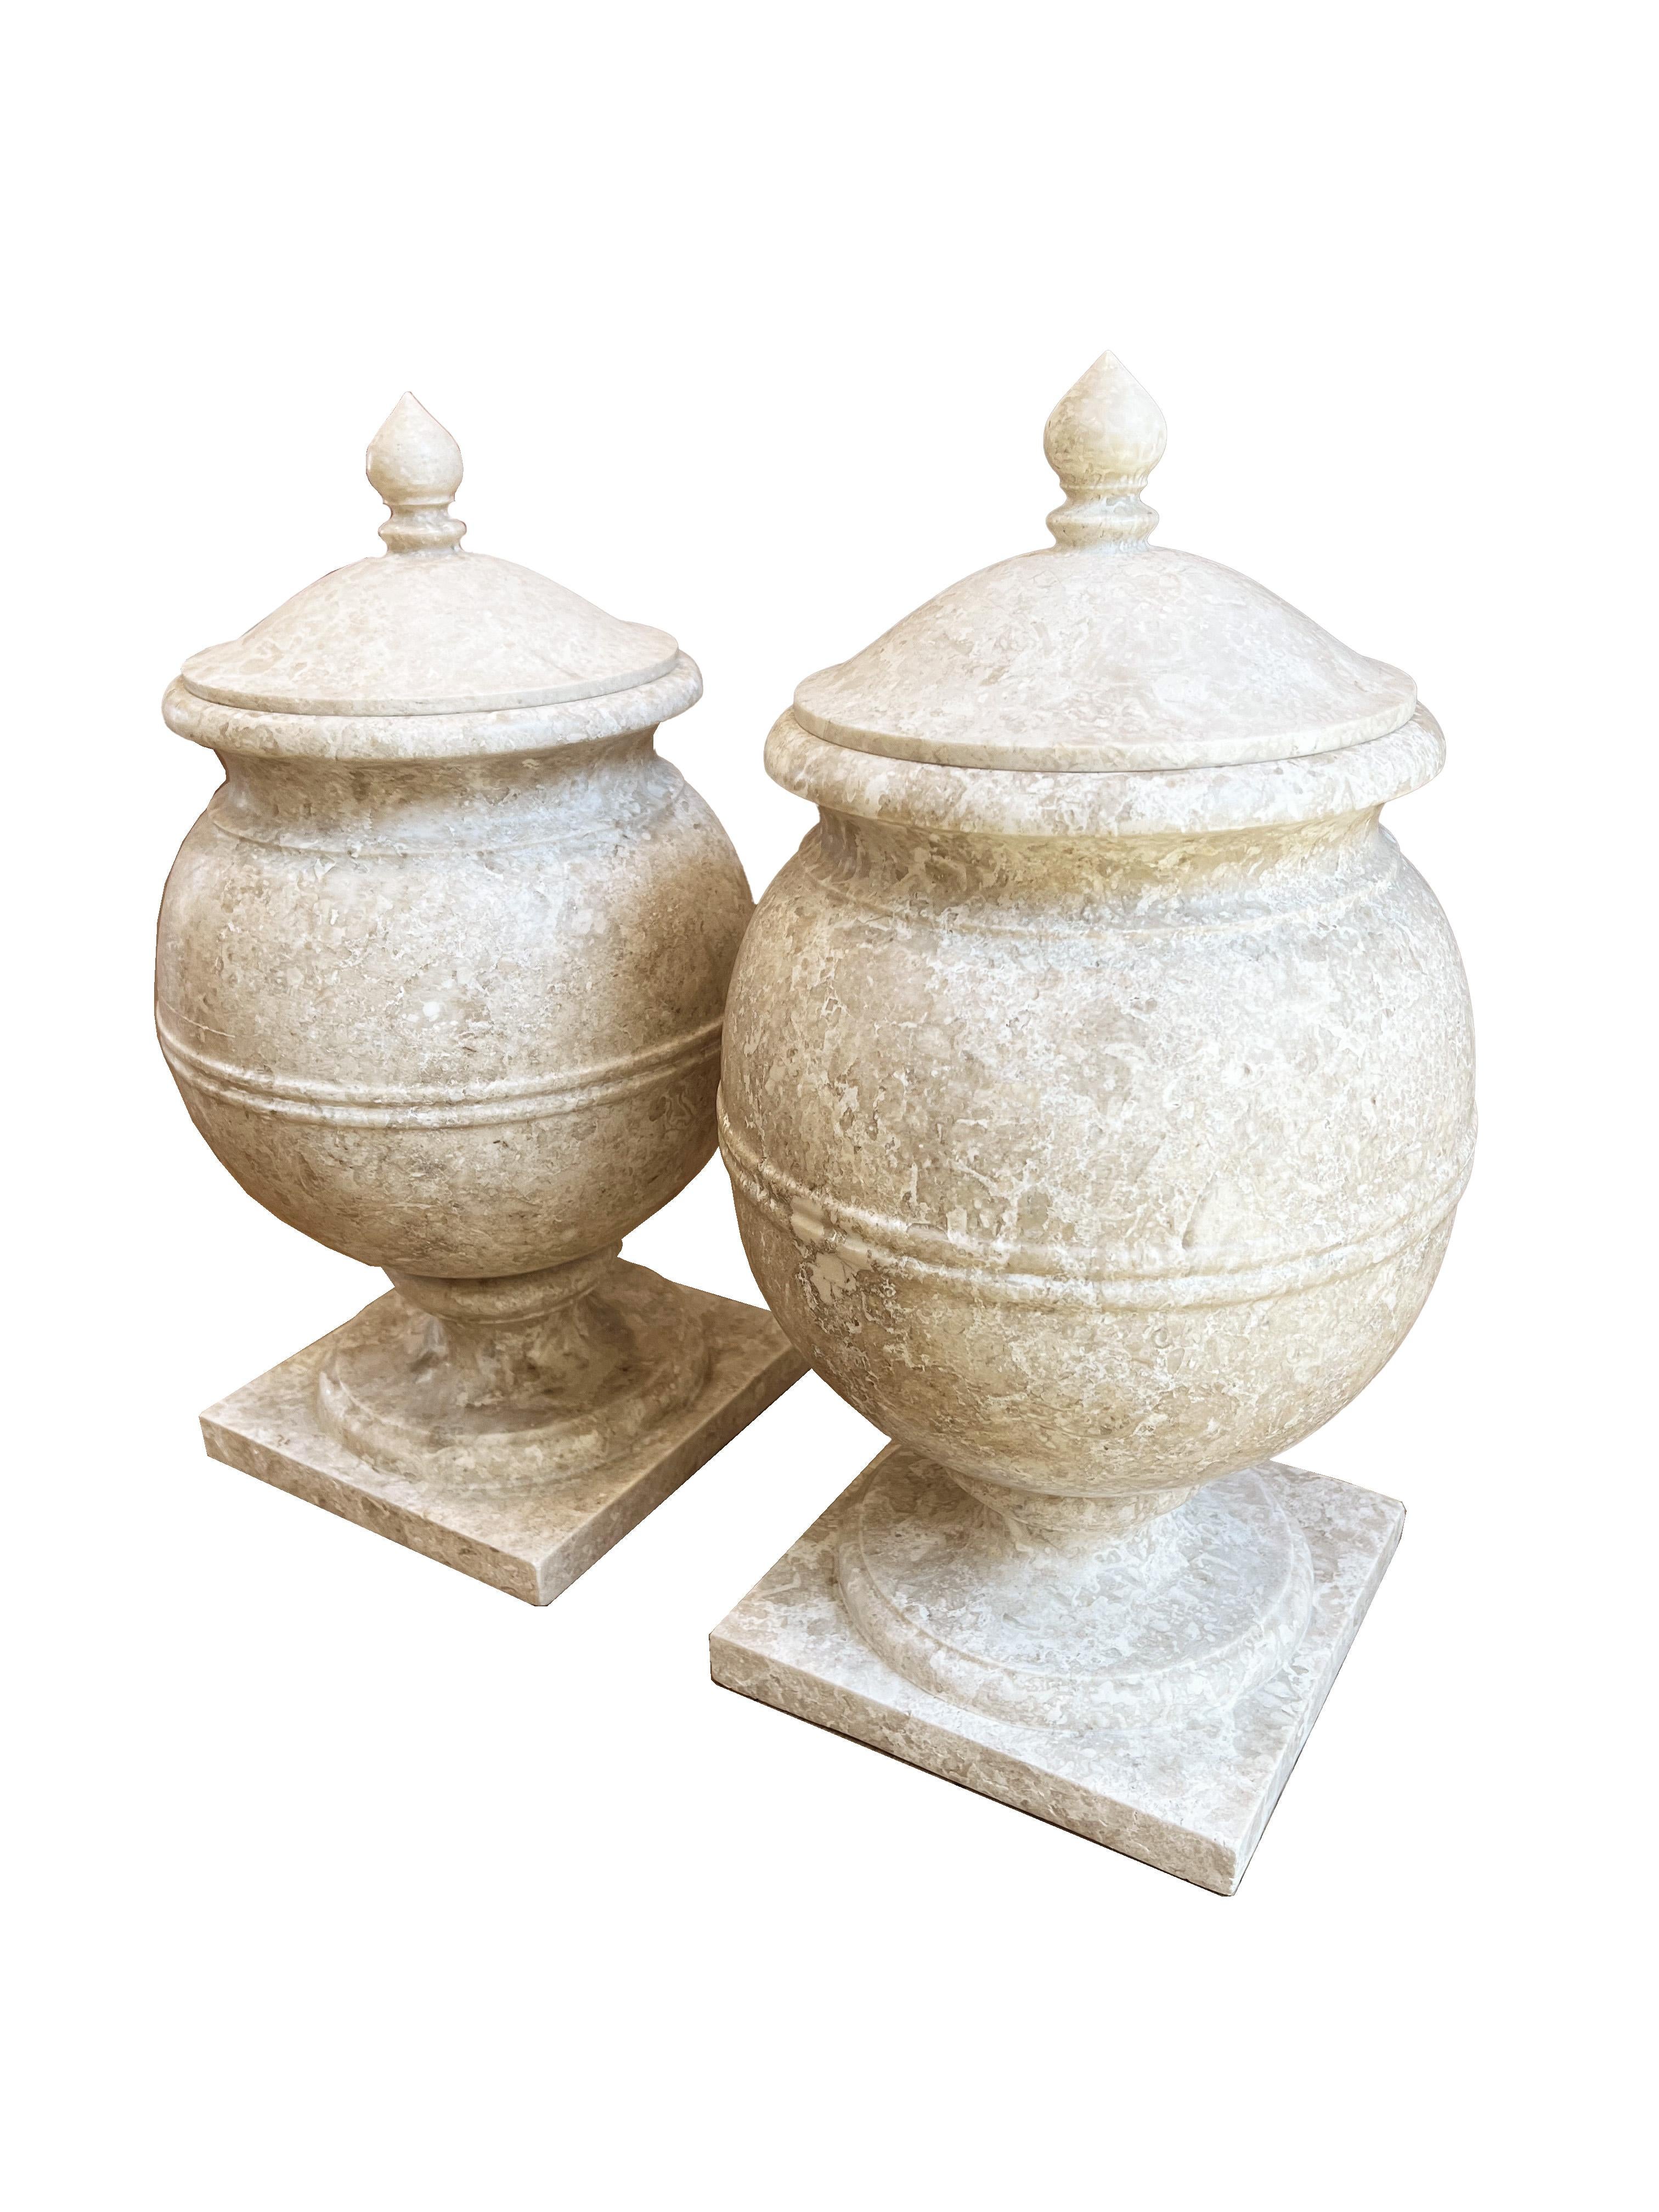 Elevate your home or garden with this exquisite pair of marble urns, each a masterpiece of design and craftsmanship. These solid, heavy urns underscore the quality of the marble and the skill involved in their creation. The removable lids offer